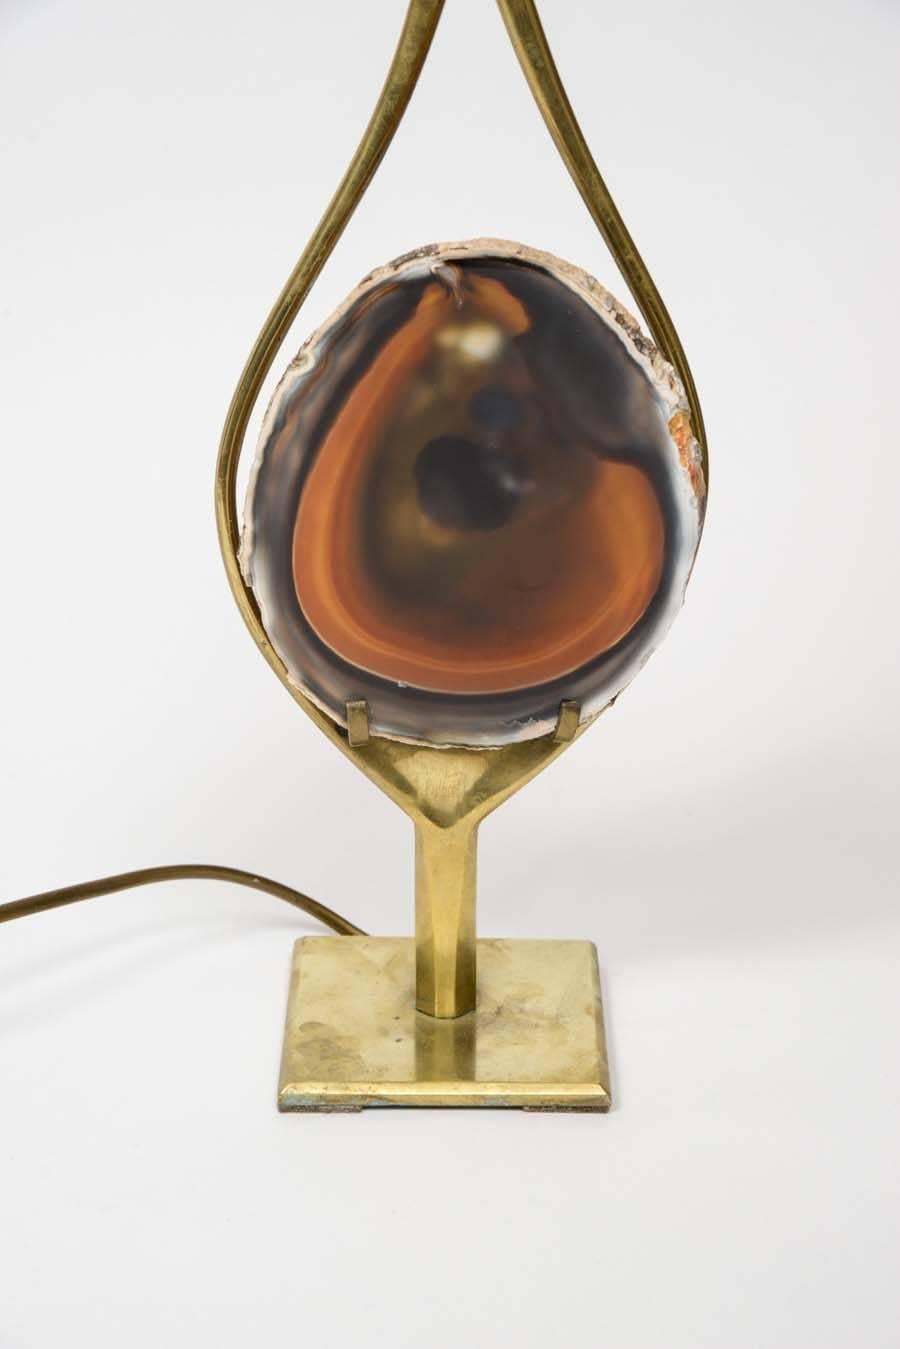 Nice lamp by Willy Rizzo made of a brass structure and a slice of agate stone.

The shape of the lamp and the deep orange and brown color of the stone show the artist's desire to create a lamp representing a flame.